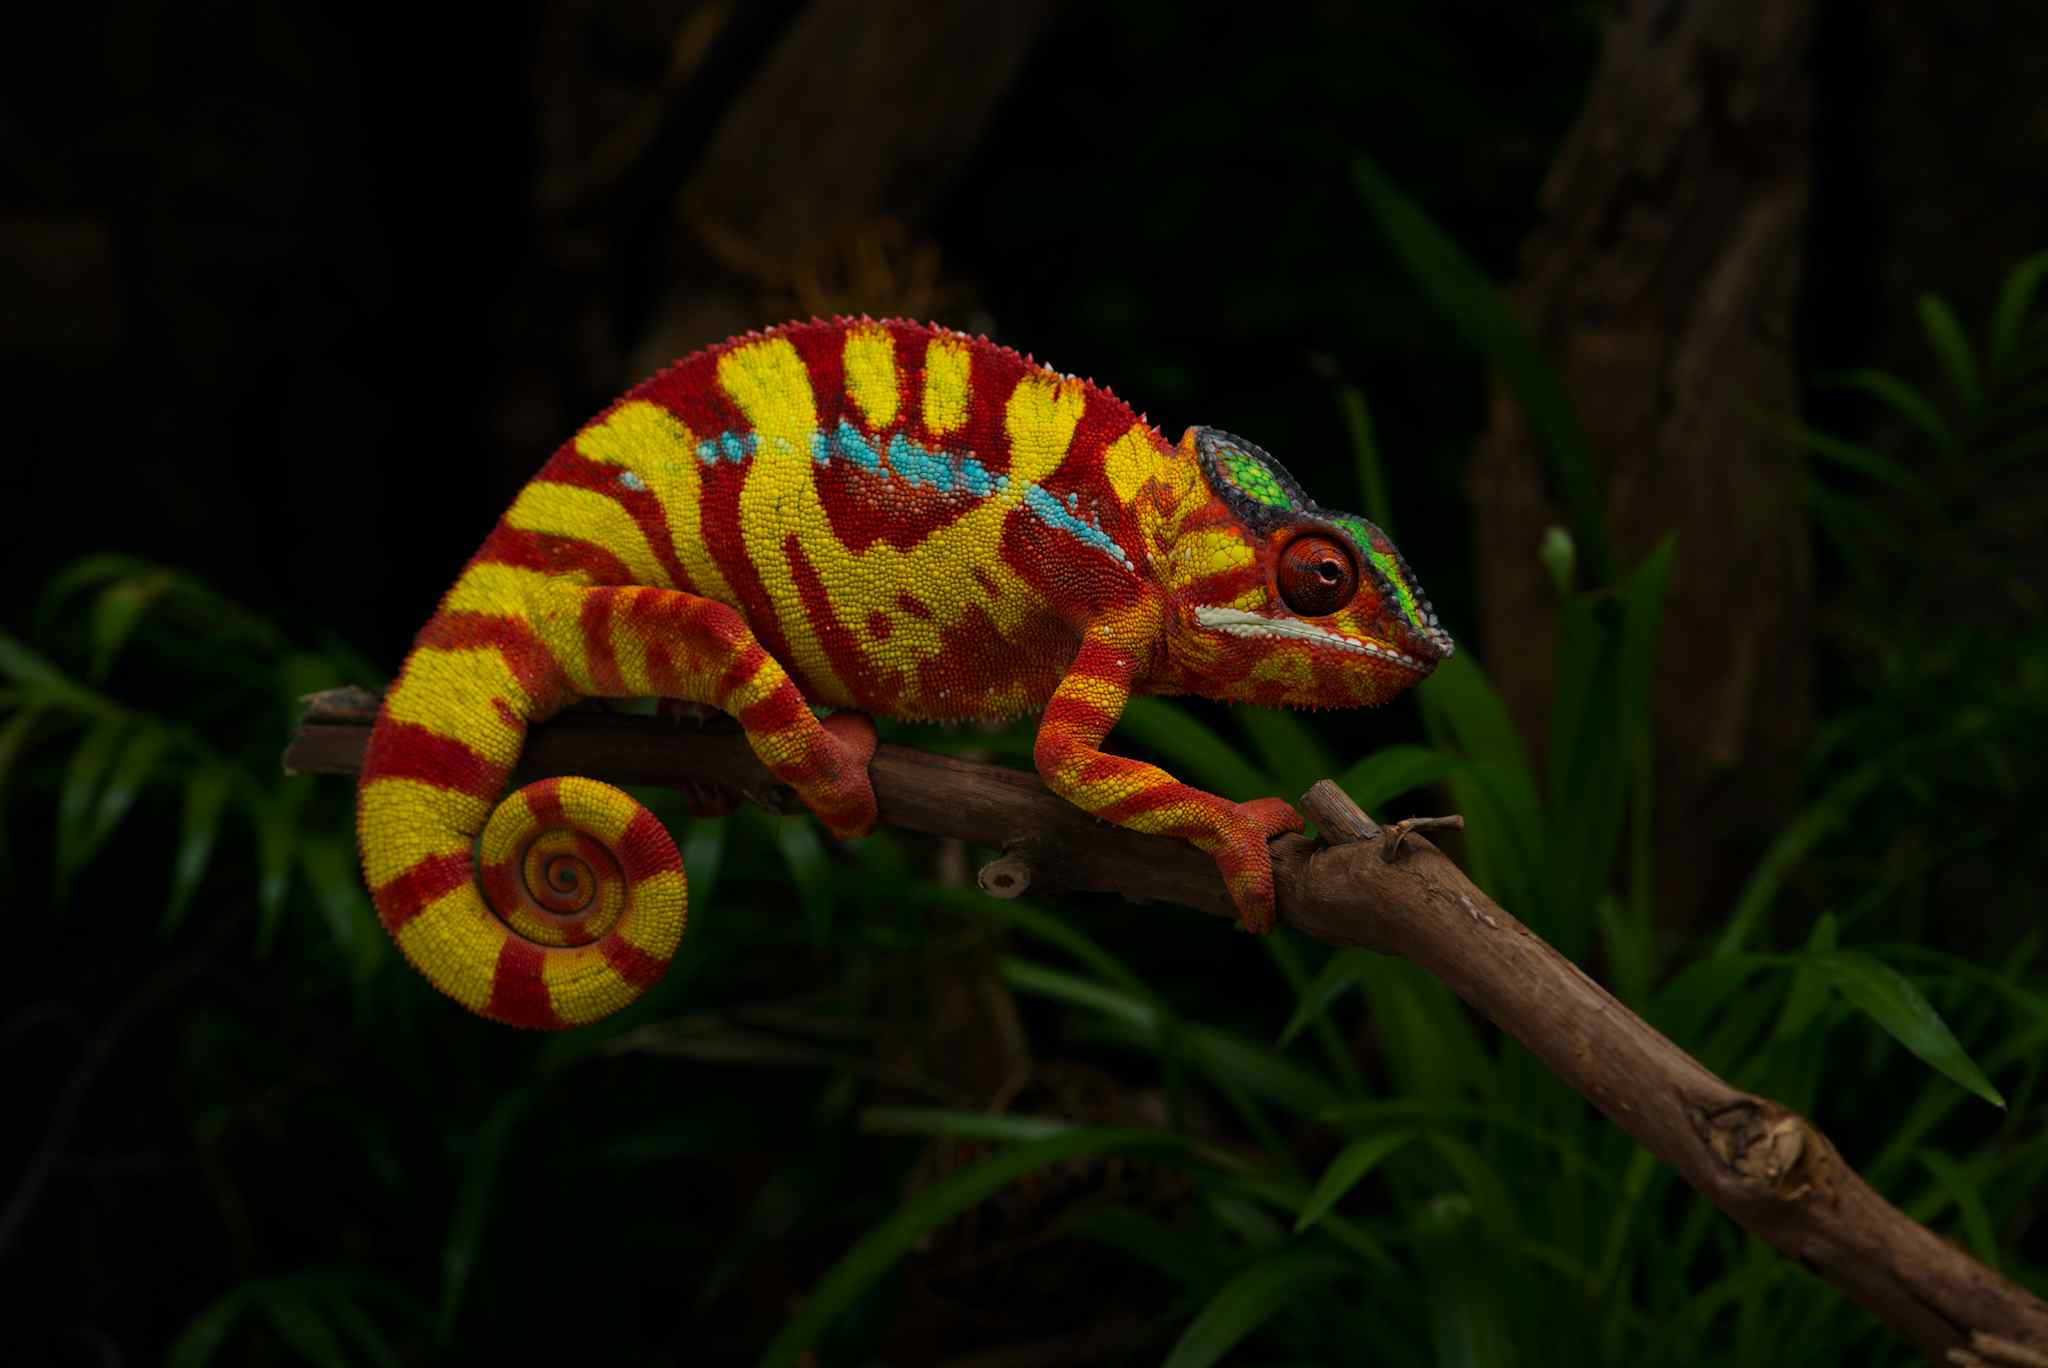 Chameleon at night, Madagascar. Photo: GettyImages-1188636178